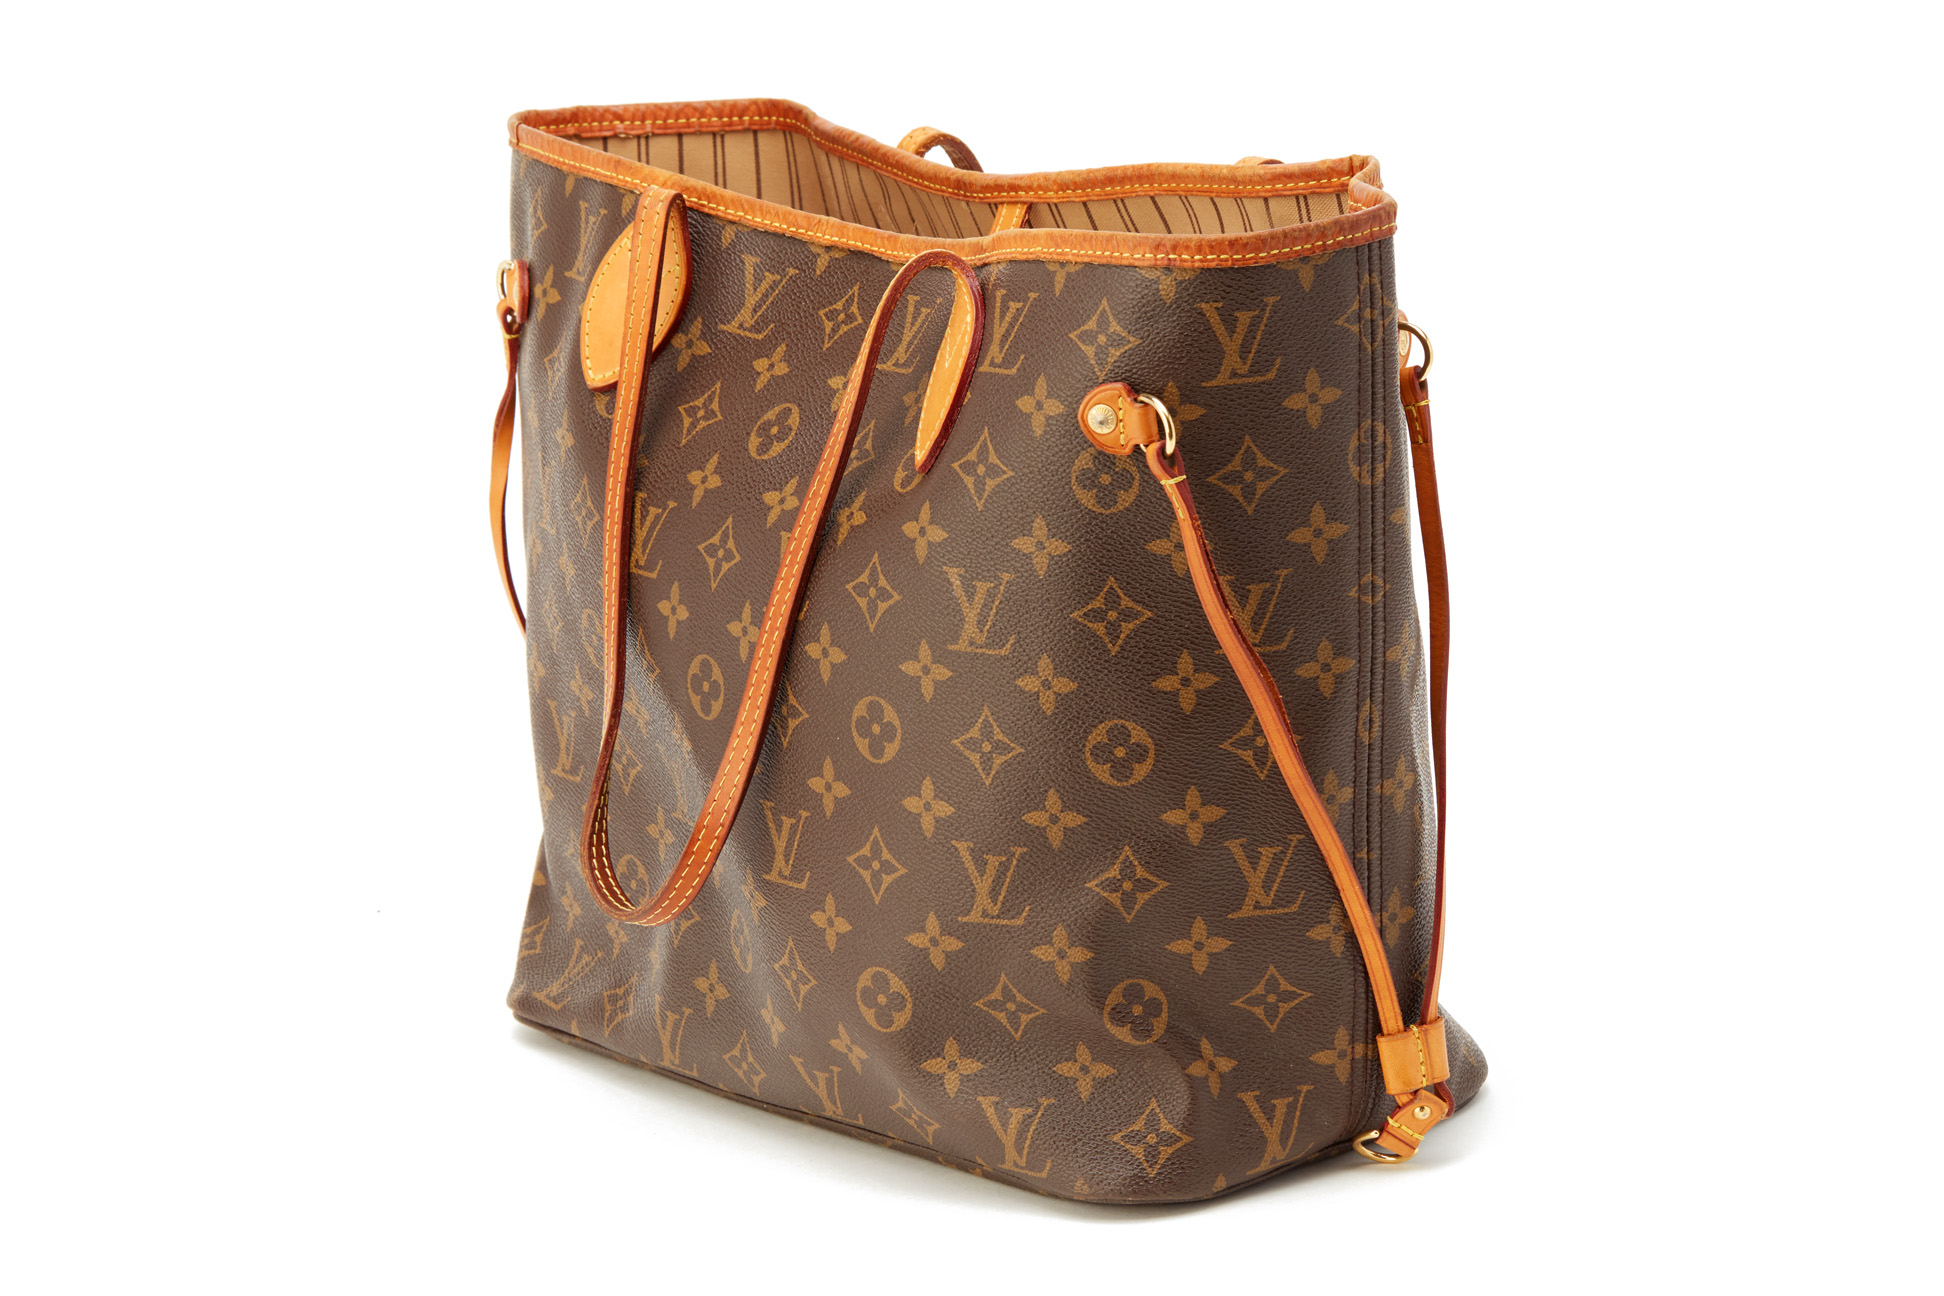 A LOUIS VUITTON BROWN MONOGRAM NEVERFULL BAG - Image 3 of 4